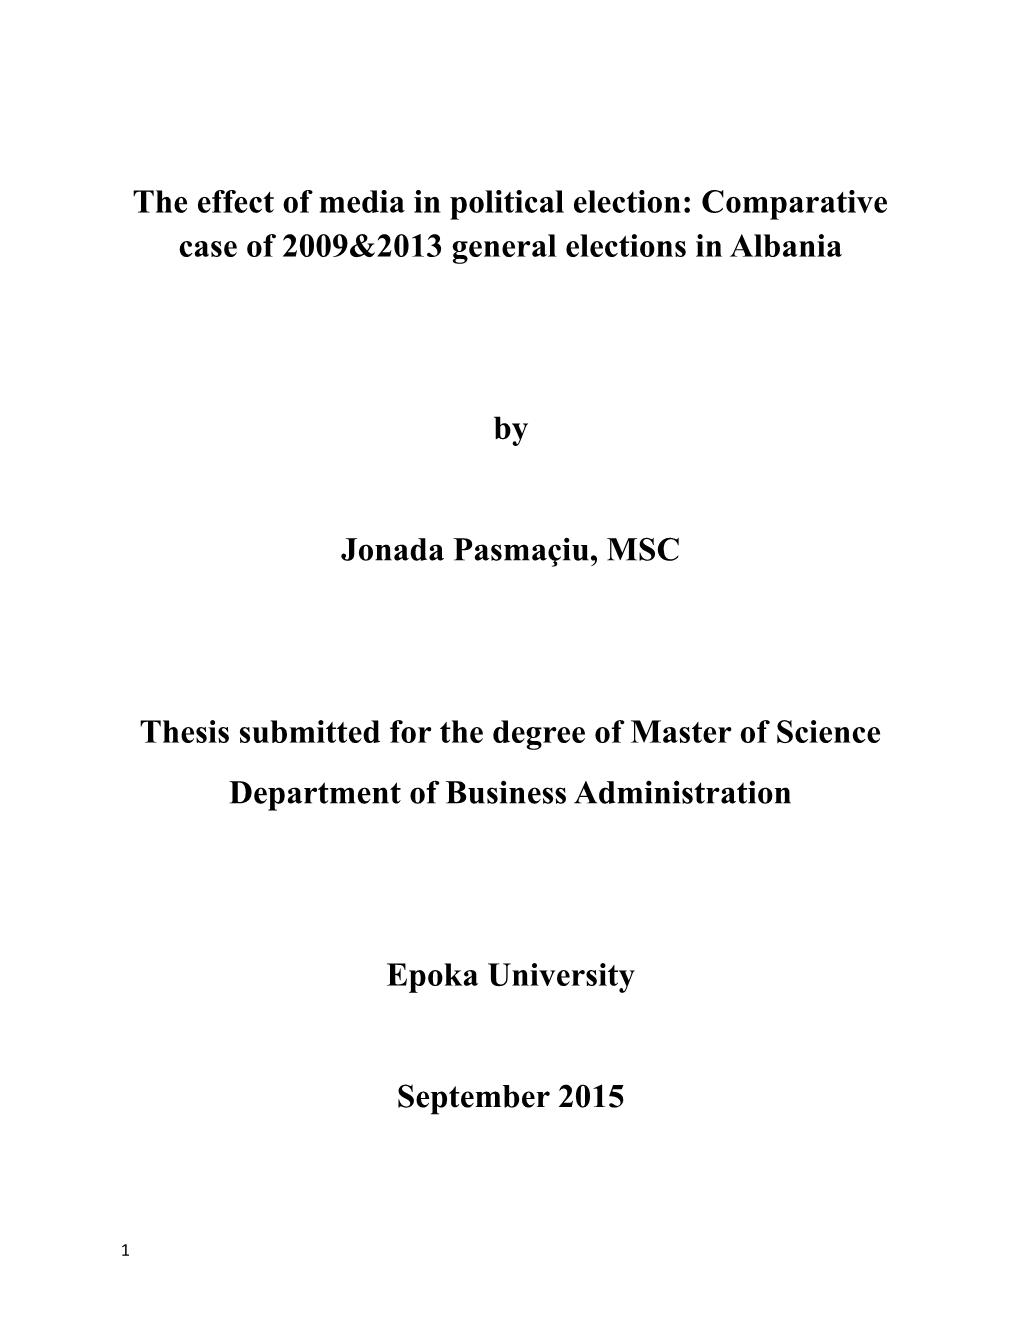 The Effect of Media in Political Election: Comparative Case of 2009&2013